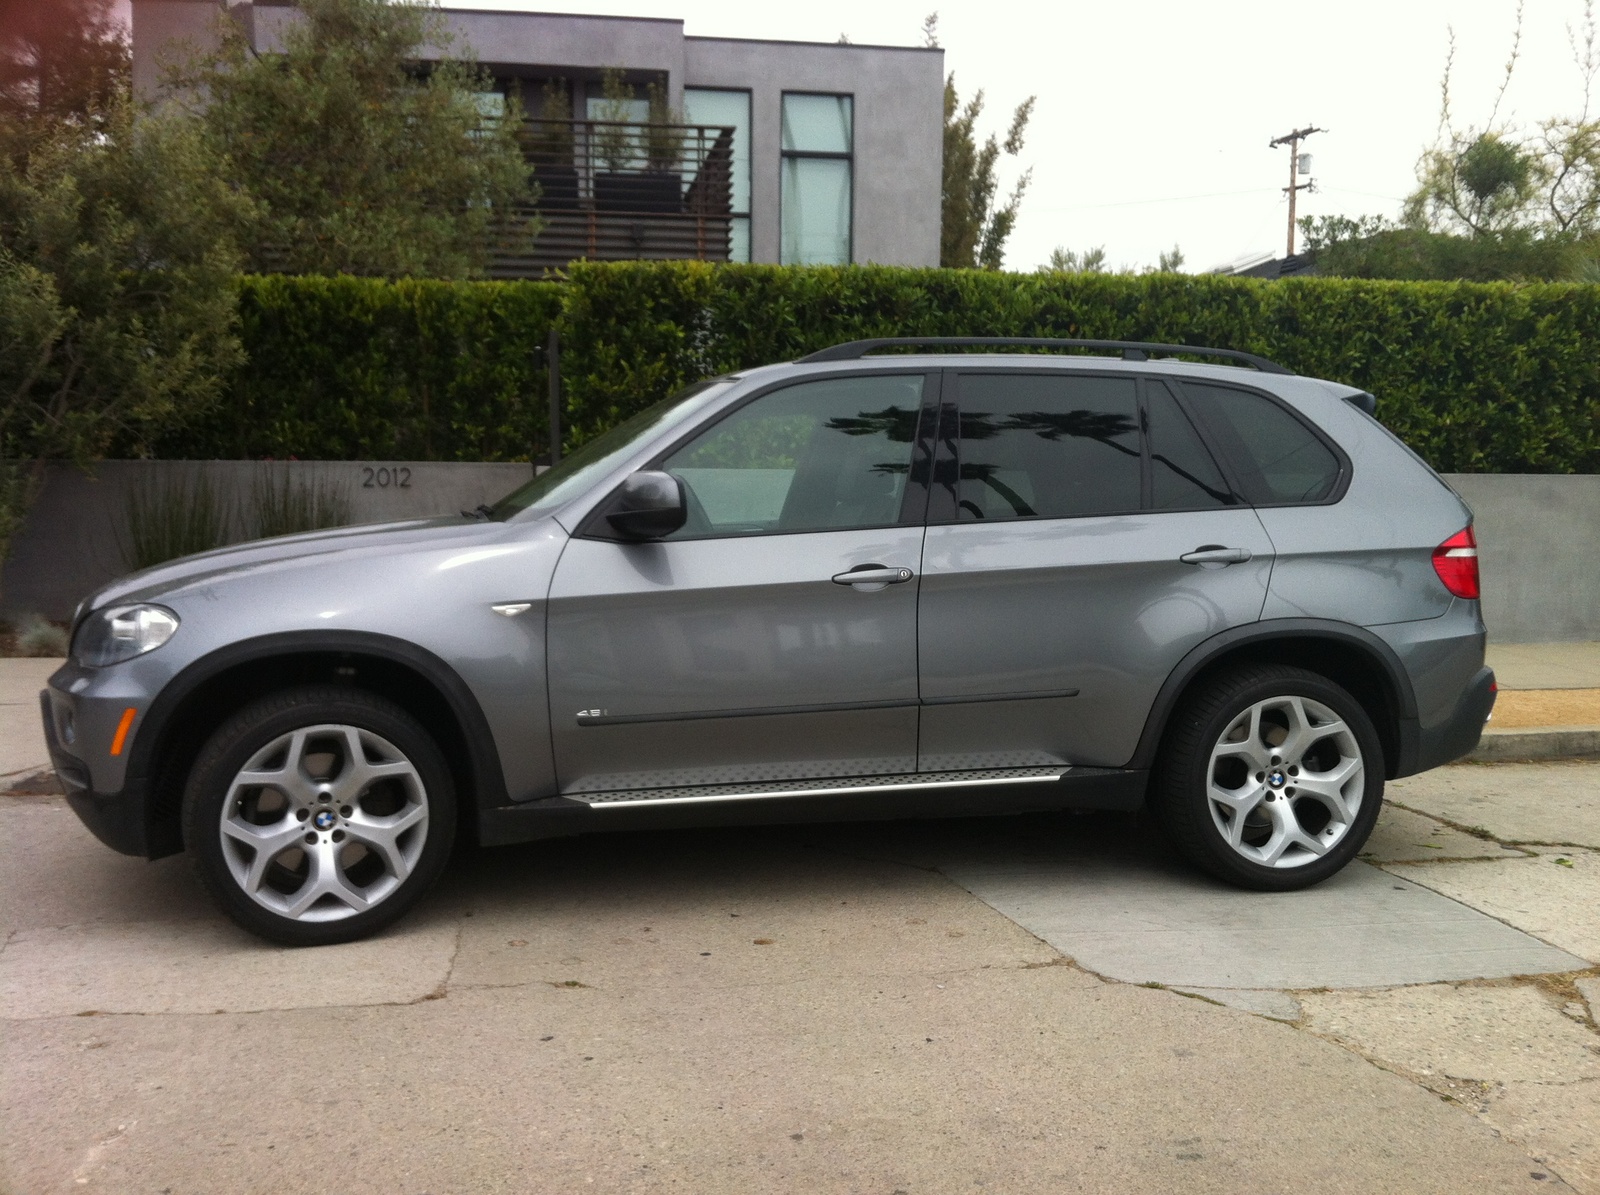 2008 Bmw x5 4.8i review #1